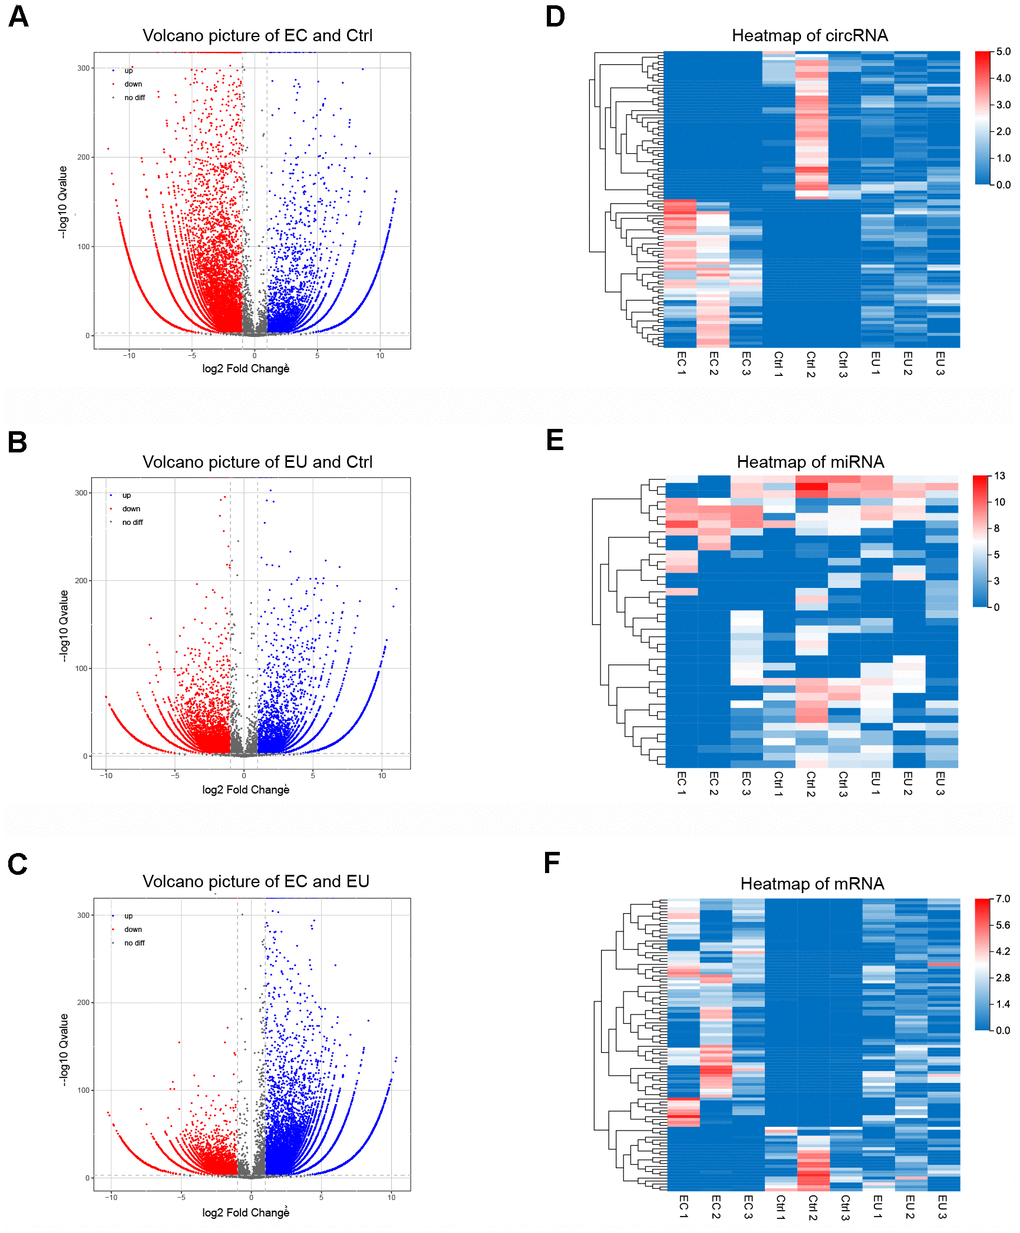 Identification of exosomal DECs, DEMis and DEMs in endometriosis. (A–C) Volcano plots of exosomal DECs based on the |log fold-change| between the EC and Ctrl groups (A), the EU and Ctrl groups (B) and the EC and EU groups (C). (D–F) Heatmap showing the expression of overlapping DEGs in the EC vs. Ctrl, EU vs. Ctrl and EC vs. EU comparisons, including the top 100 DECs, top 100 DEMis and top 100 DEMs. DECs, DEMis and DEMs: Differentially expressed circRNAs, miRNAs and mRNAs.